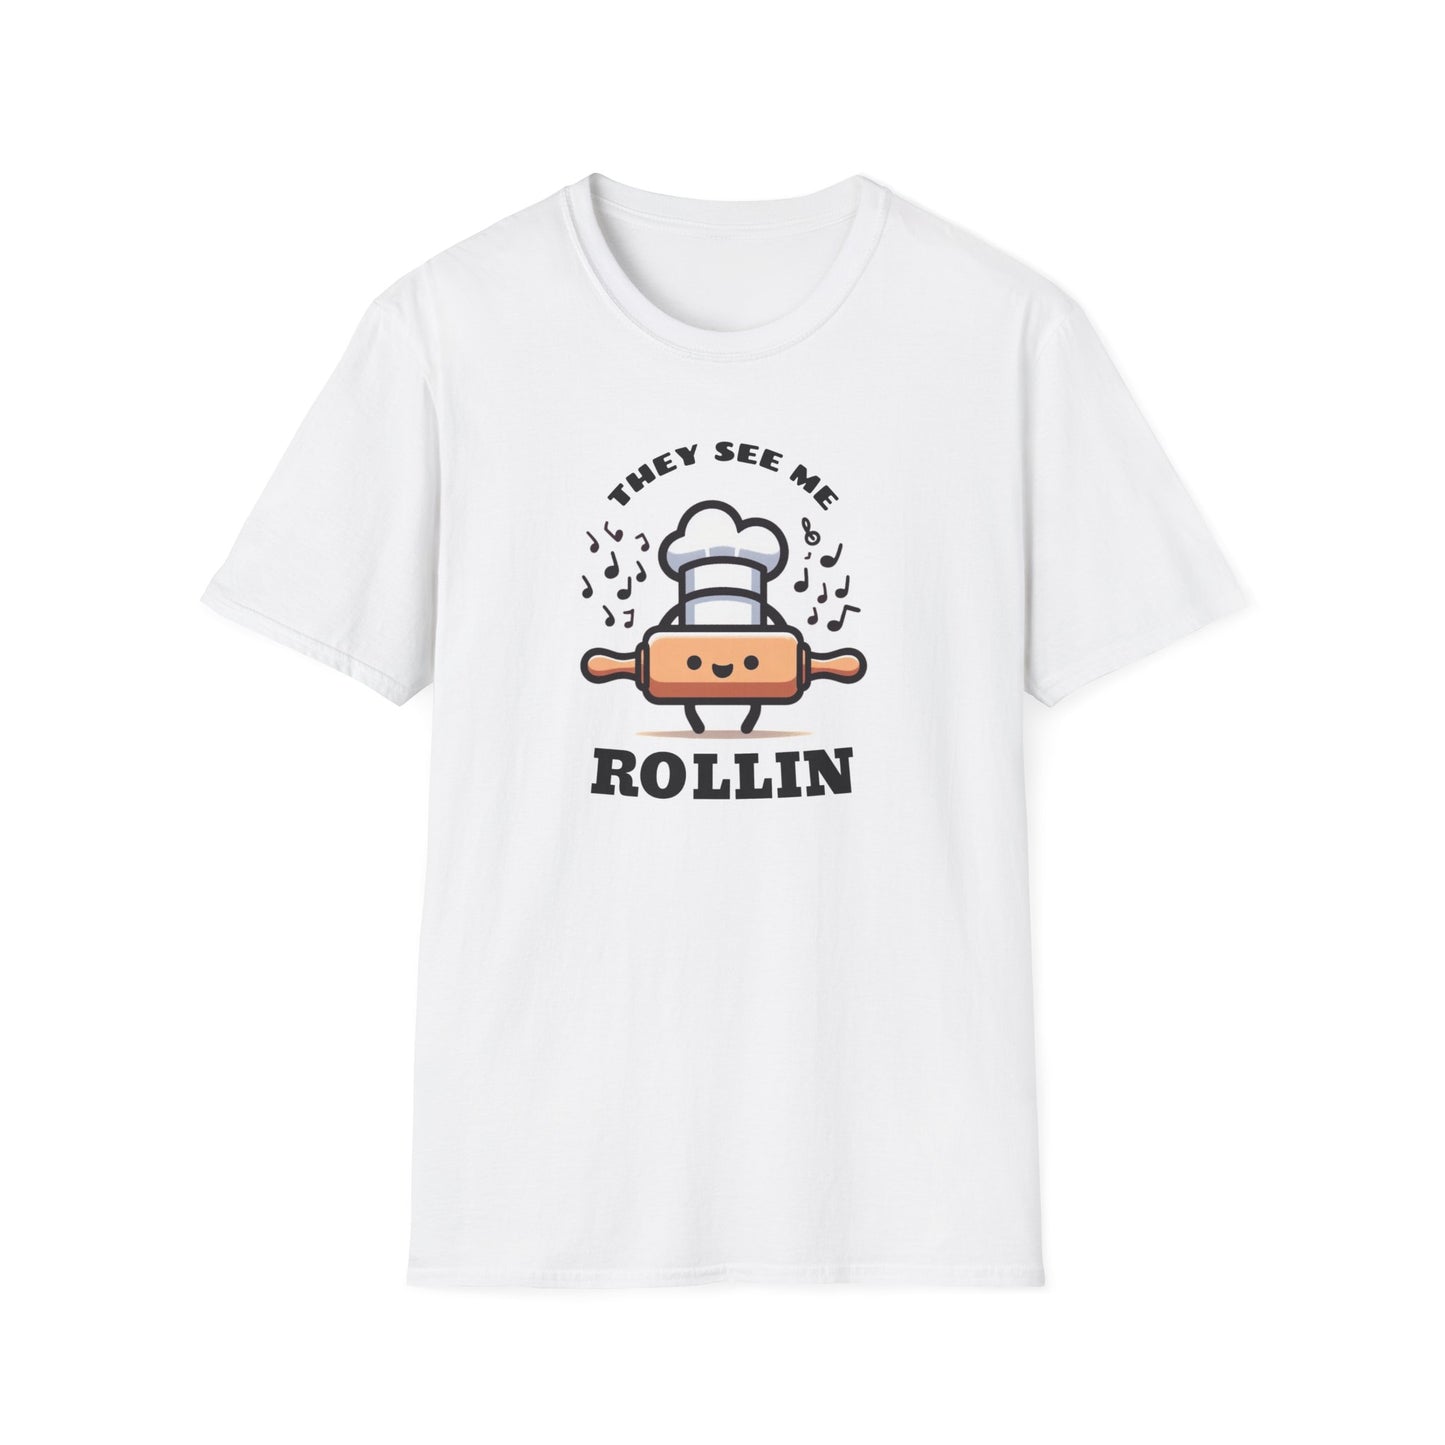 Rolling in Laughter: The Giggle Baker's Weapon of Choice Tee They See Me Rollin Tee